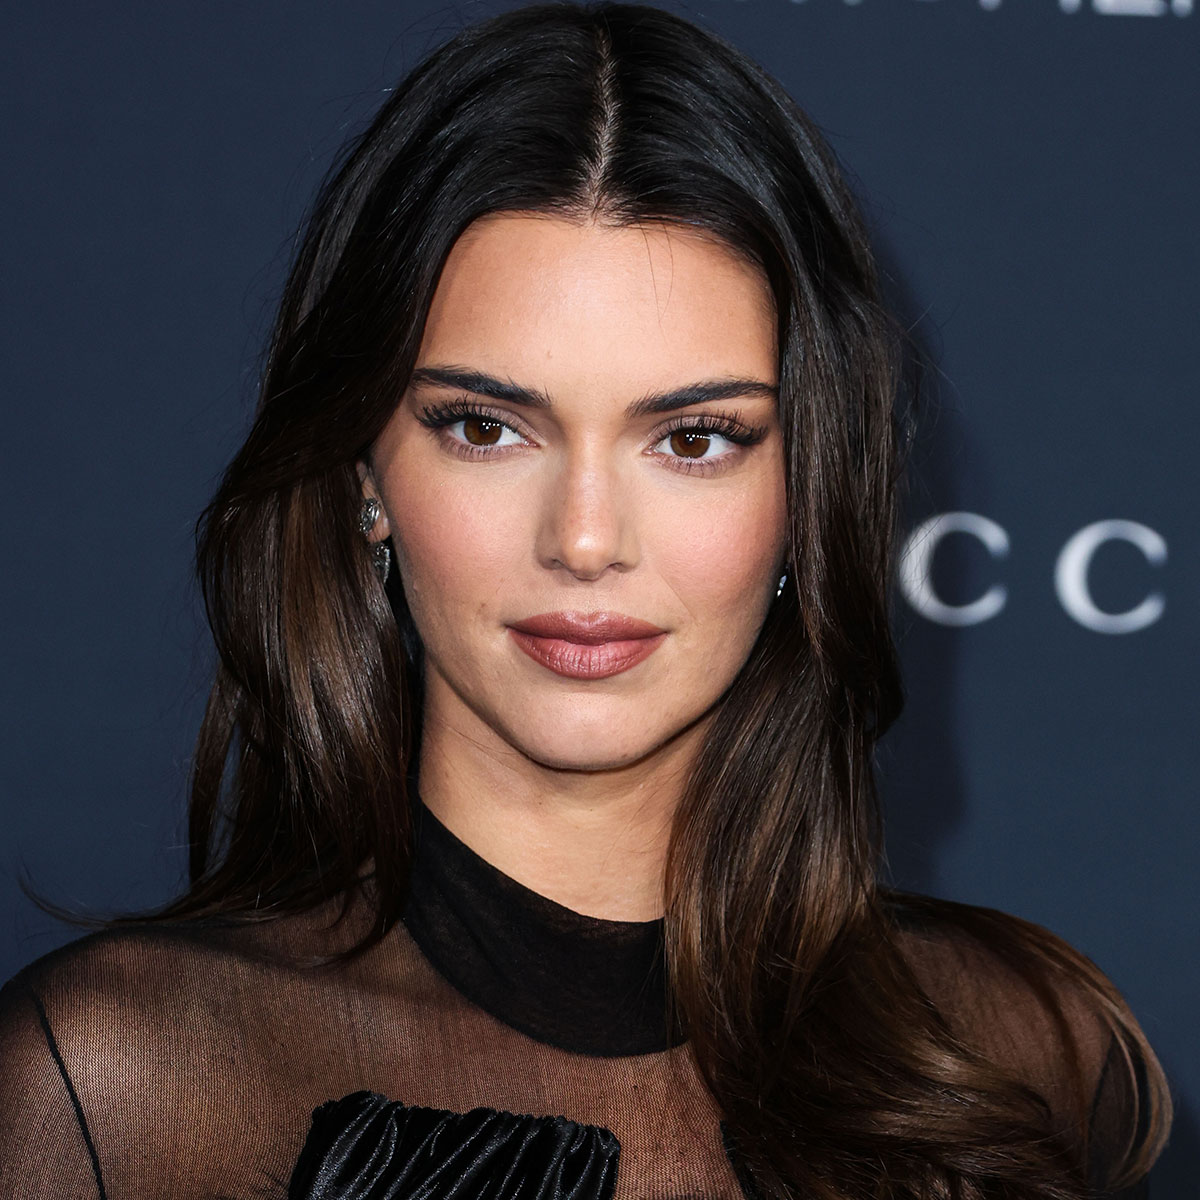 Kendall Jenner Breaks Instagram In A Strapless Leather Dress From Kylie ...